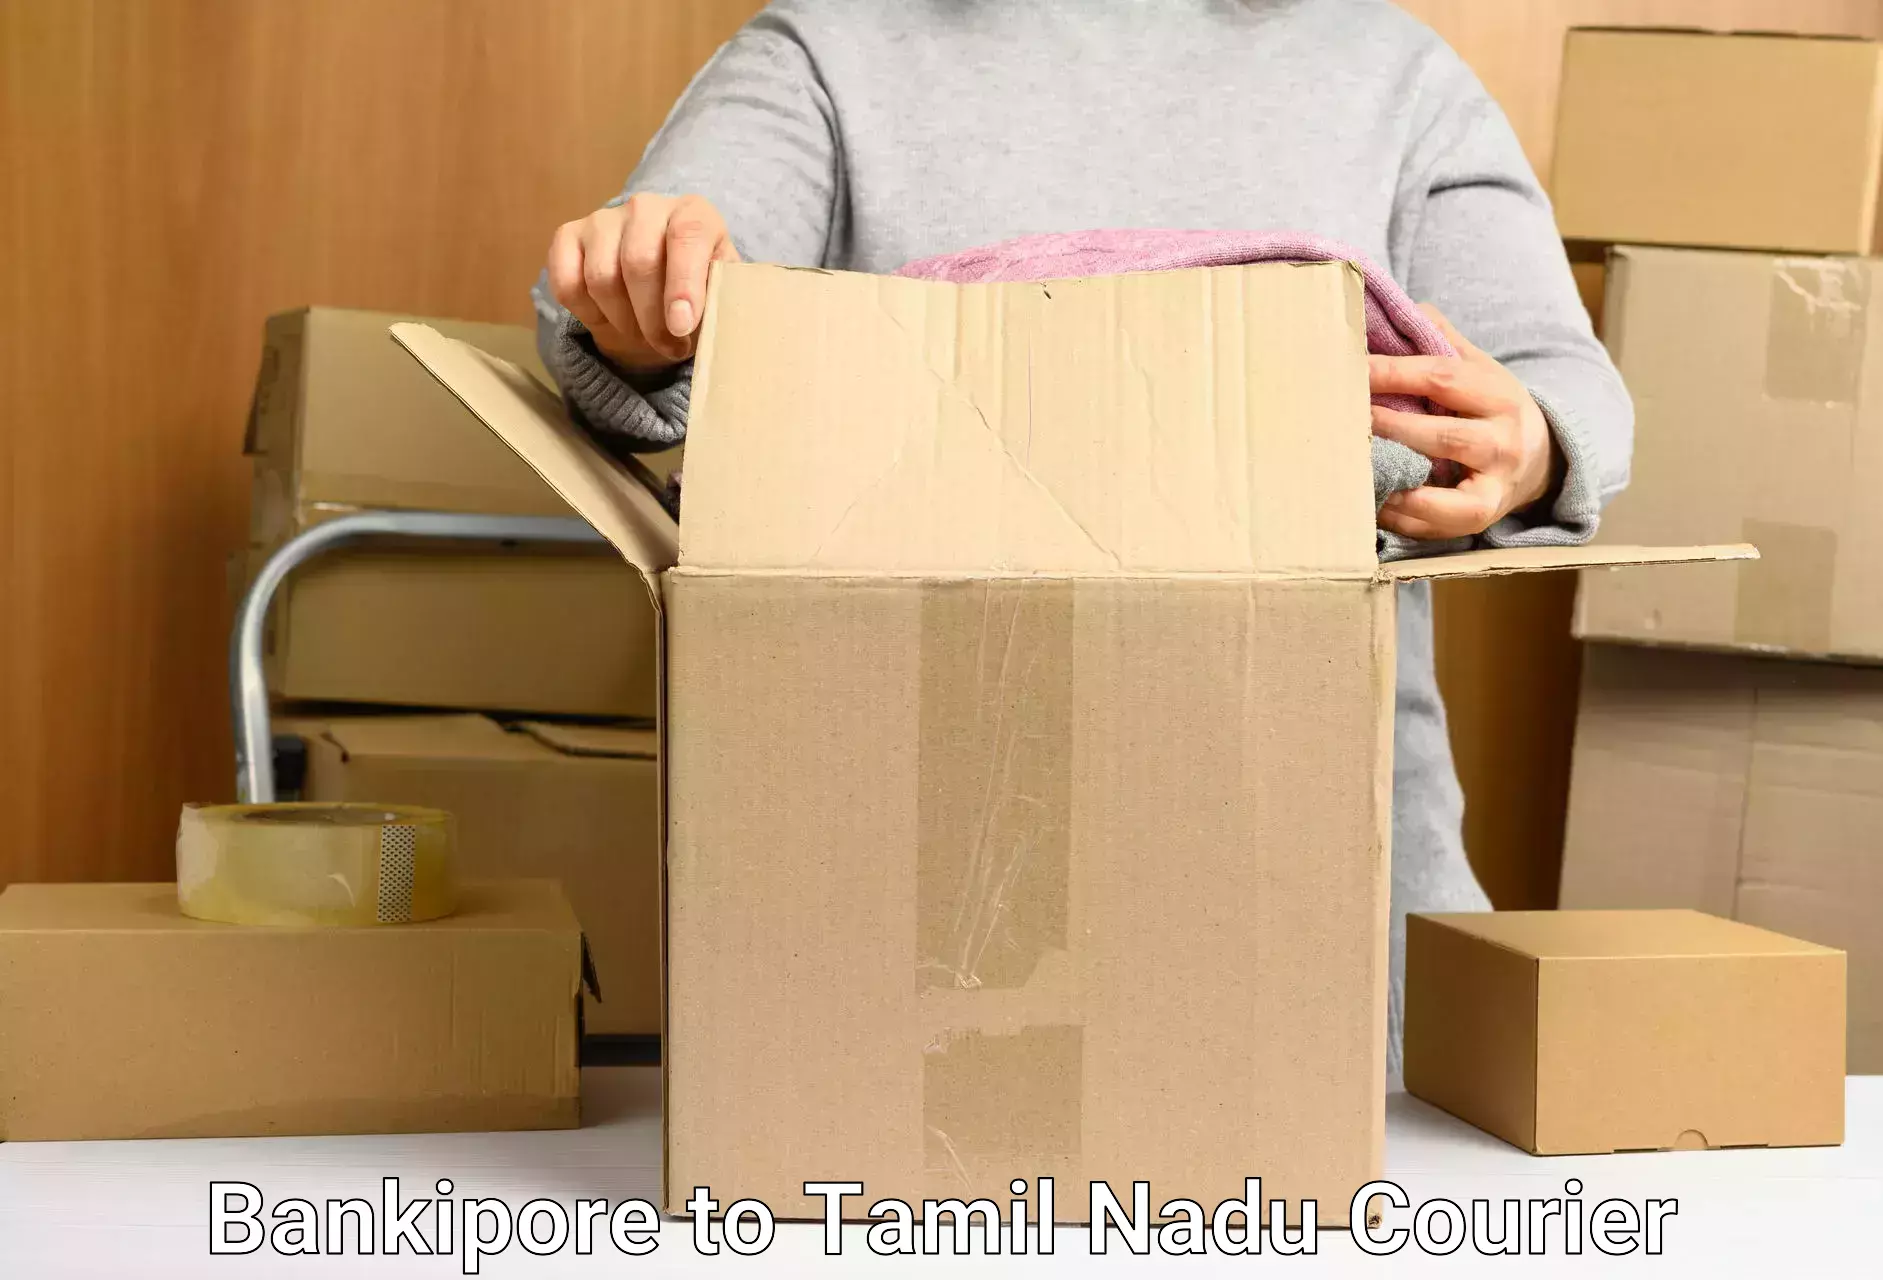 Automated parcel services Bankipore to Tamil Nadu